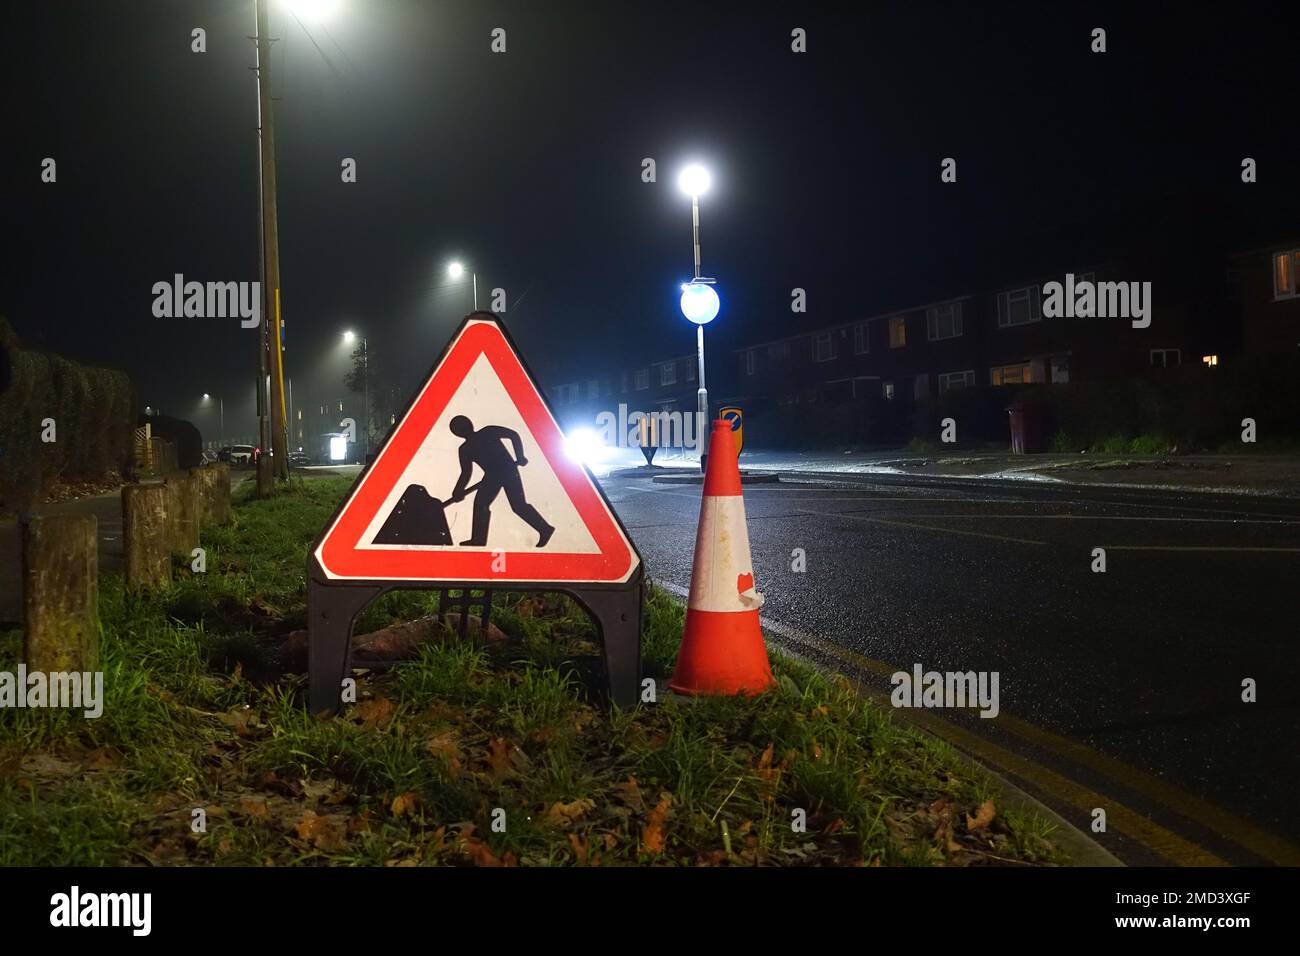 A triangular roadworks sign and traffic cone at the side of a road at night to worn motorists of roadworks ahead, Stock Photo